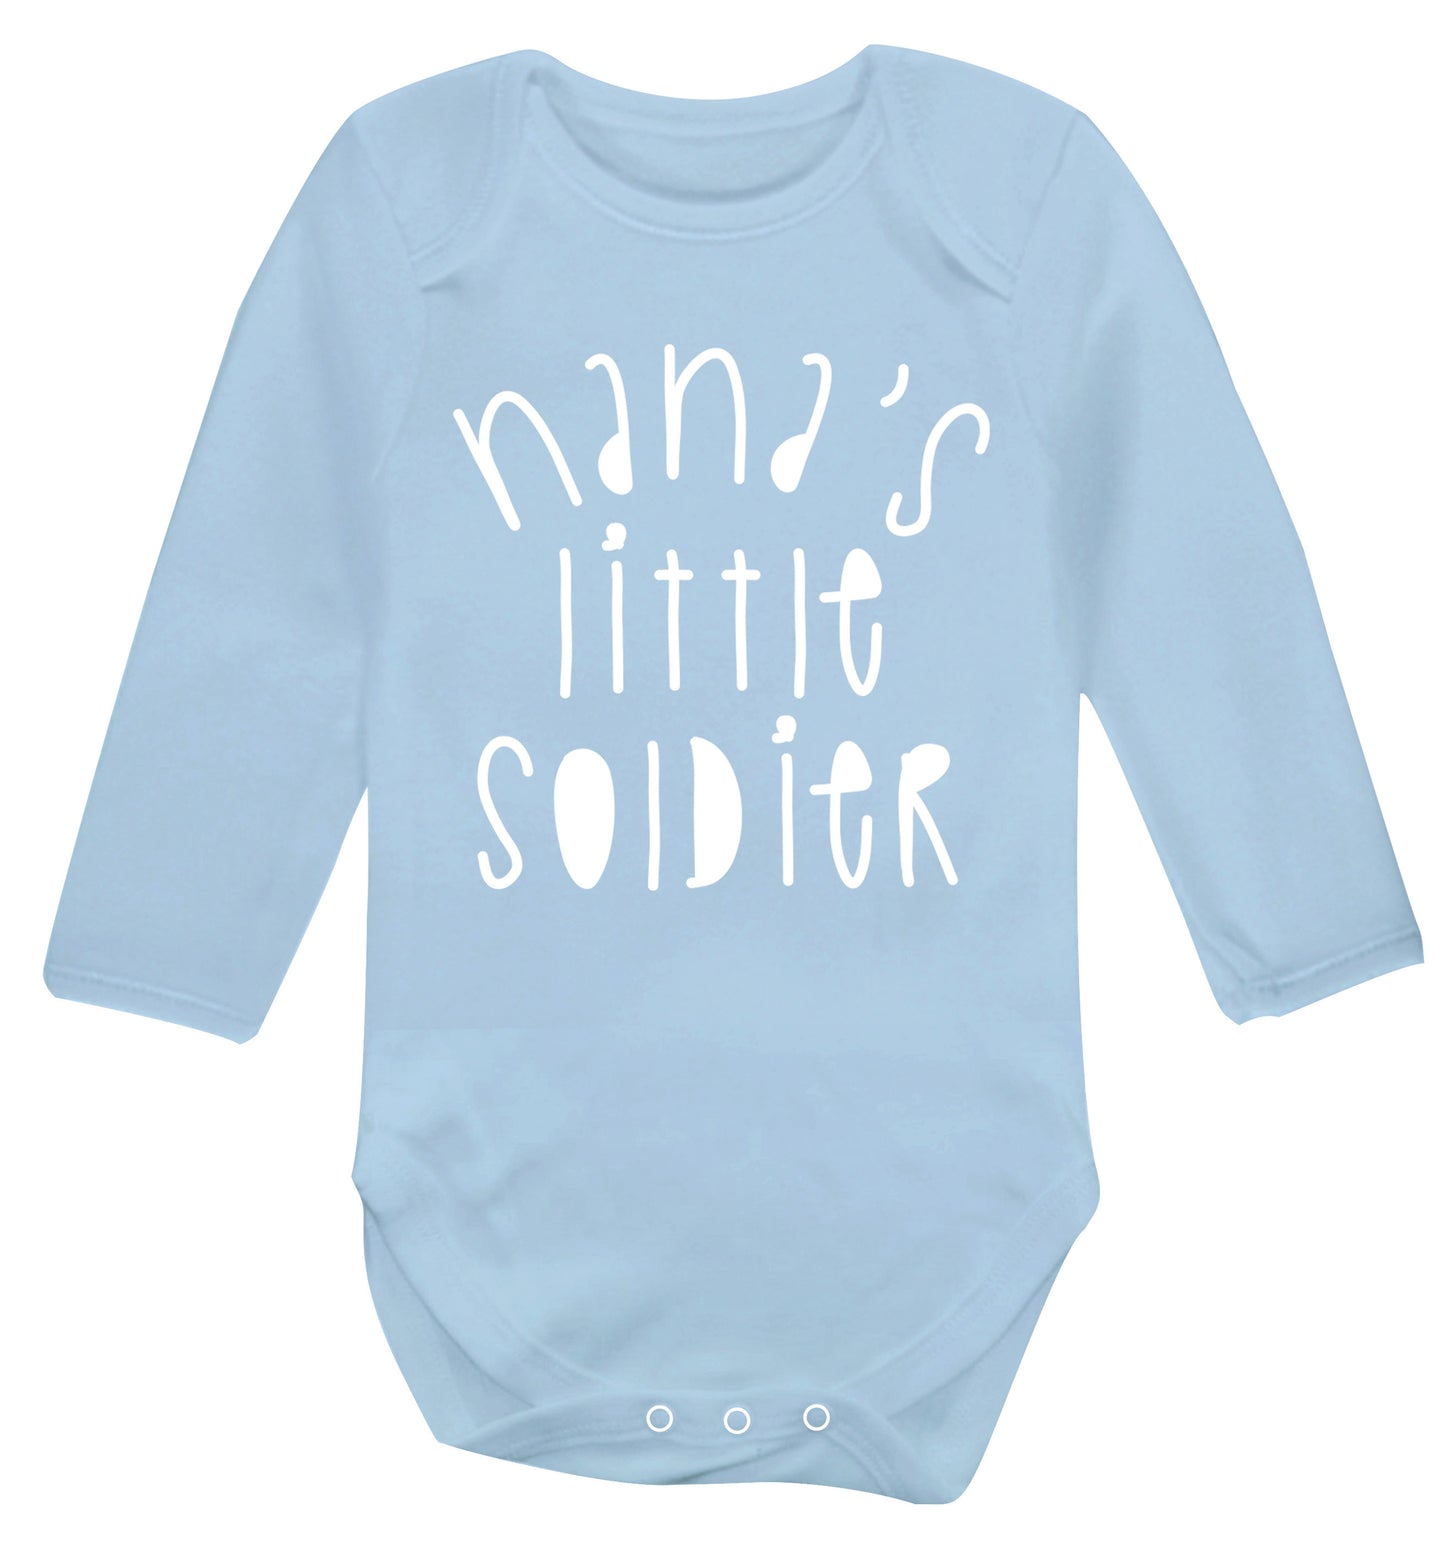 Nana's little soldier Baby Vest long sleeved pale blue 6-12 months